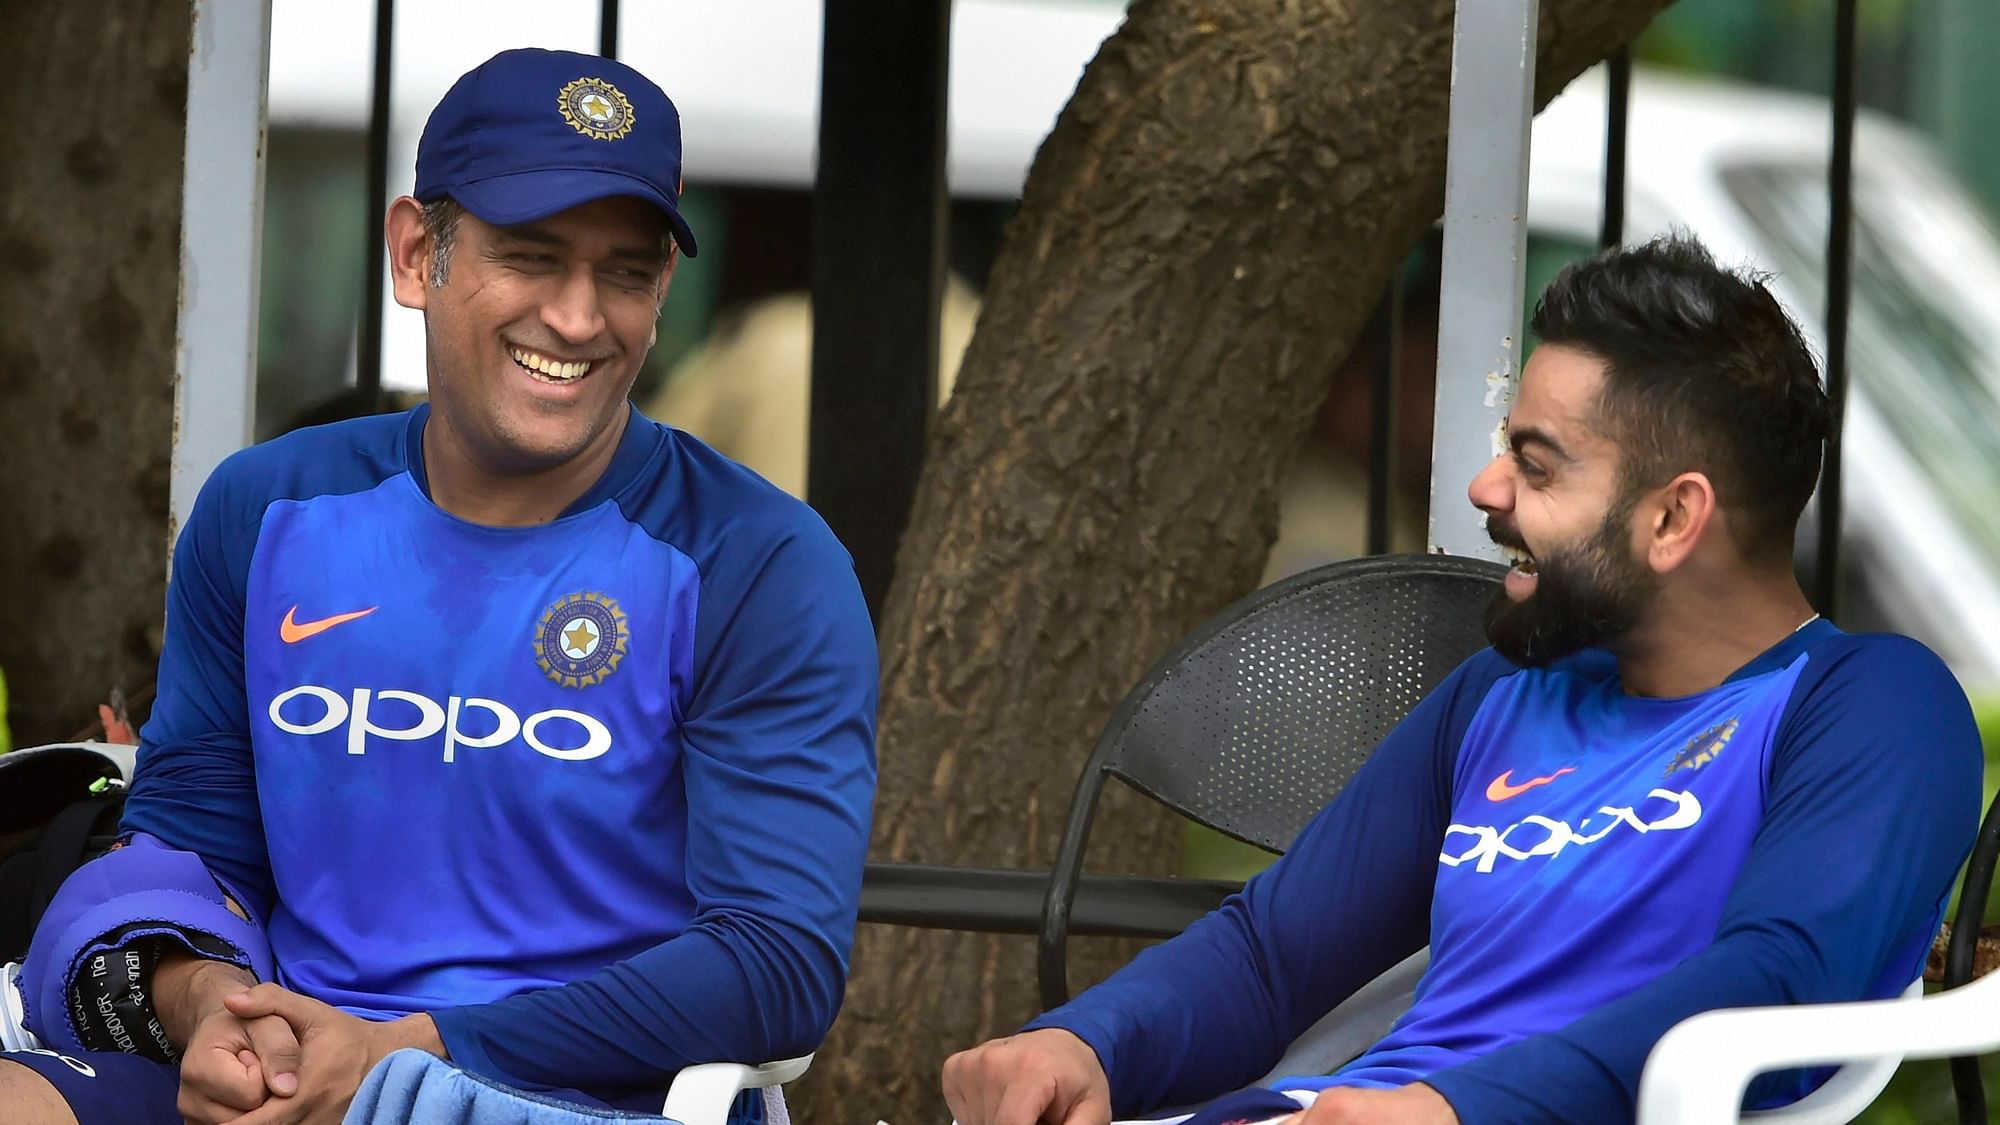 This Virat Kohli tweet for MS Dhoni was the most retweeted sports tweet of 2019.